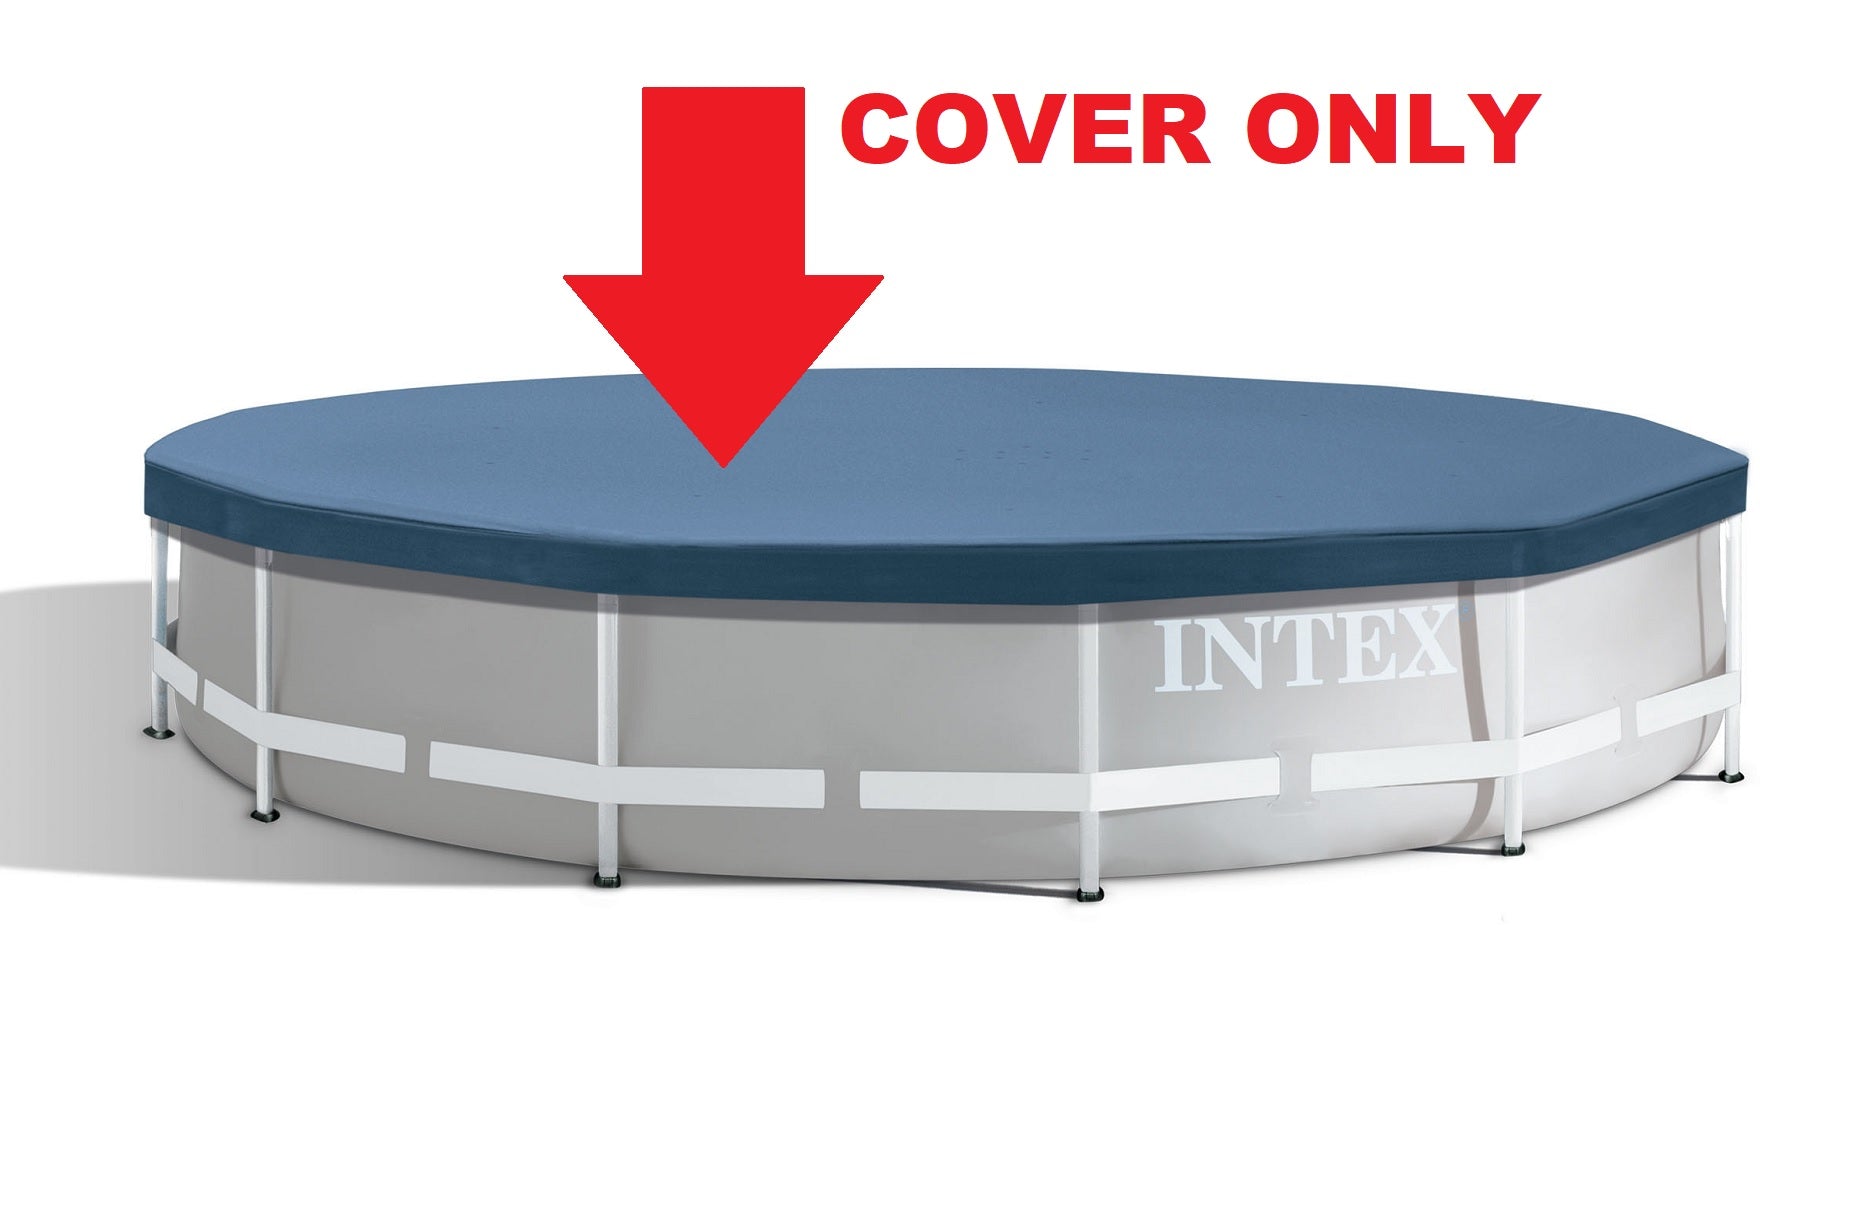 Intex 12FT X 10in Round Pool Cover for Metal Frame Pool